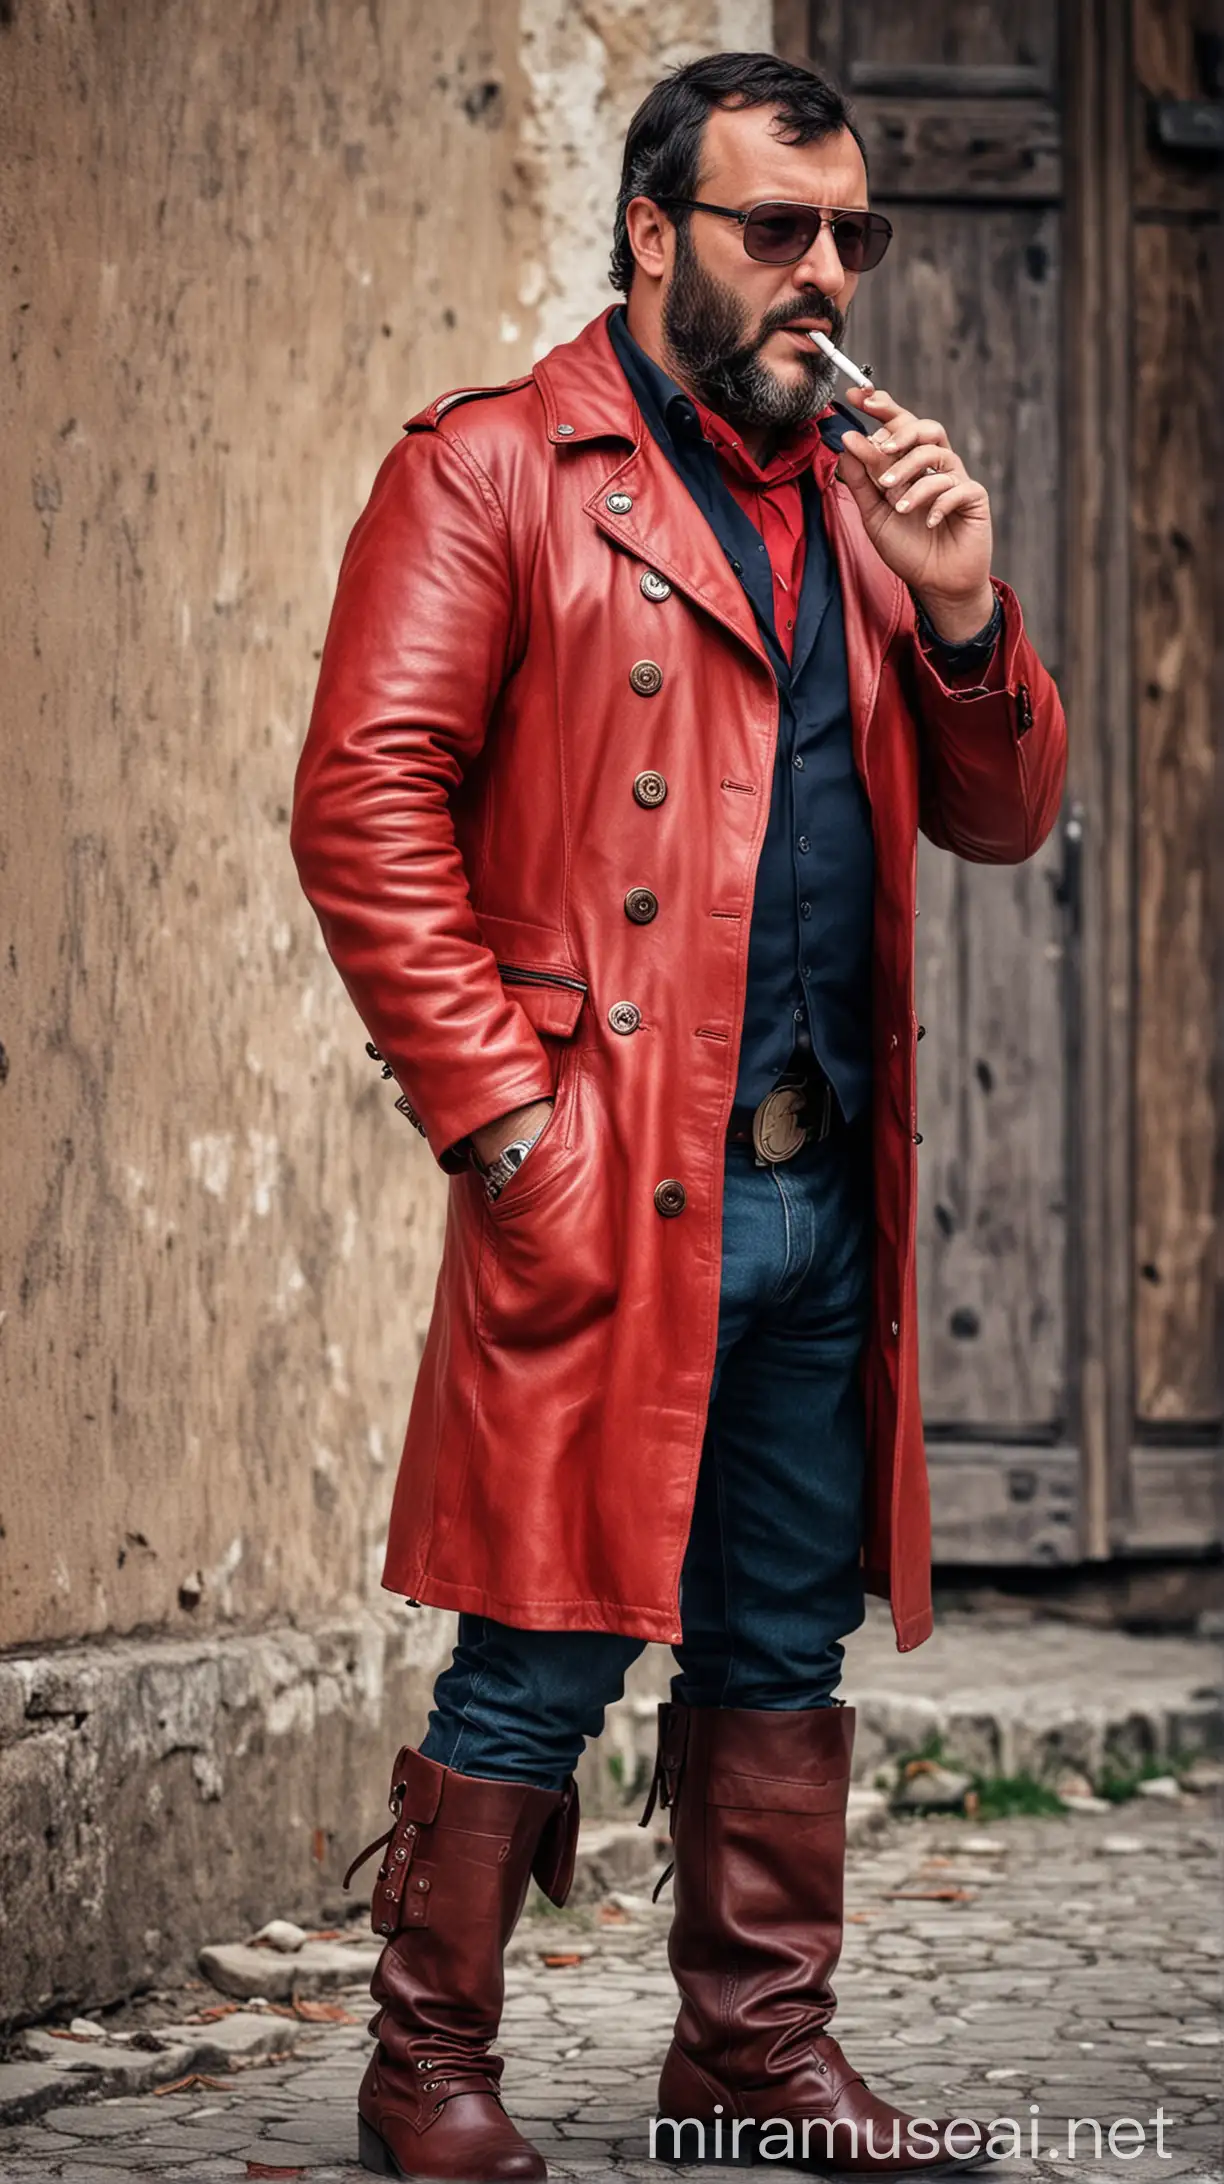 A powerful and ruggedly handsome Matteo Salvini smoking a big cigar muscled and bearded  biker red leathers dressed  wearing glasses and black boots